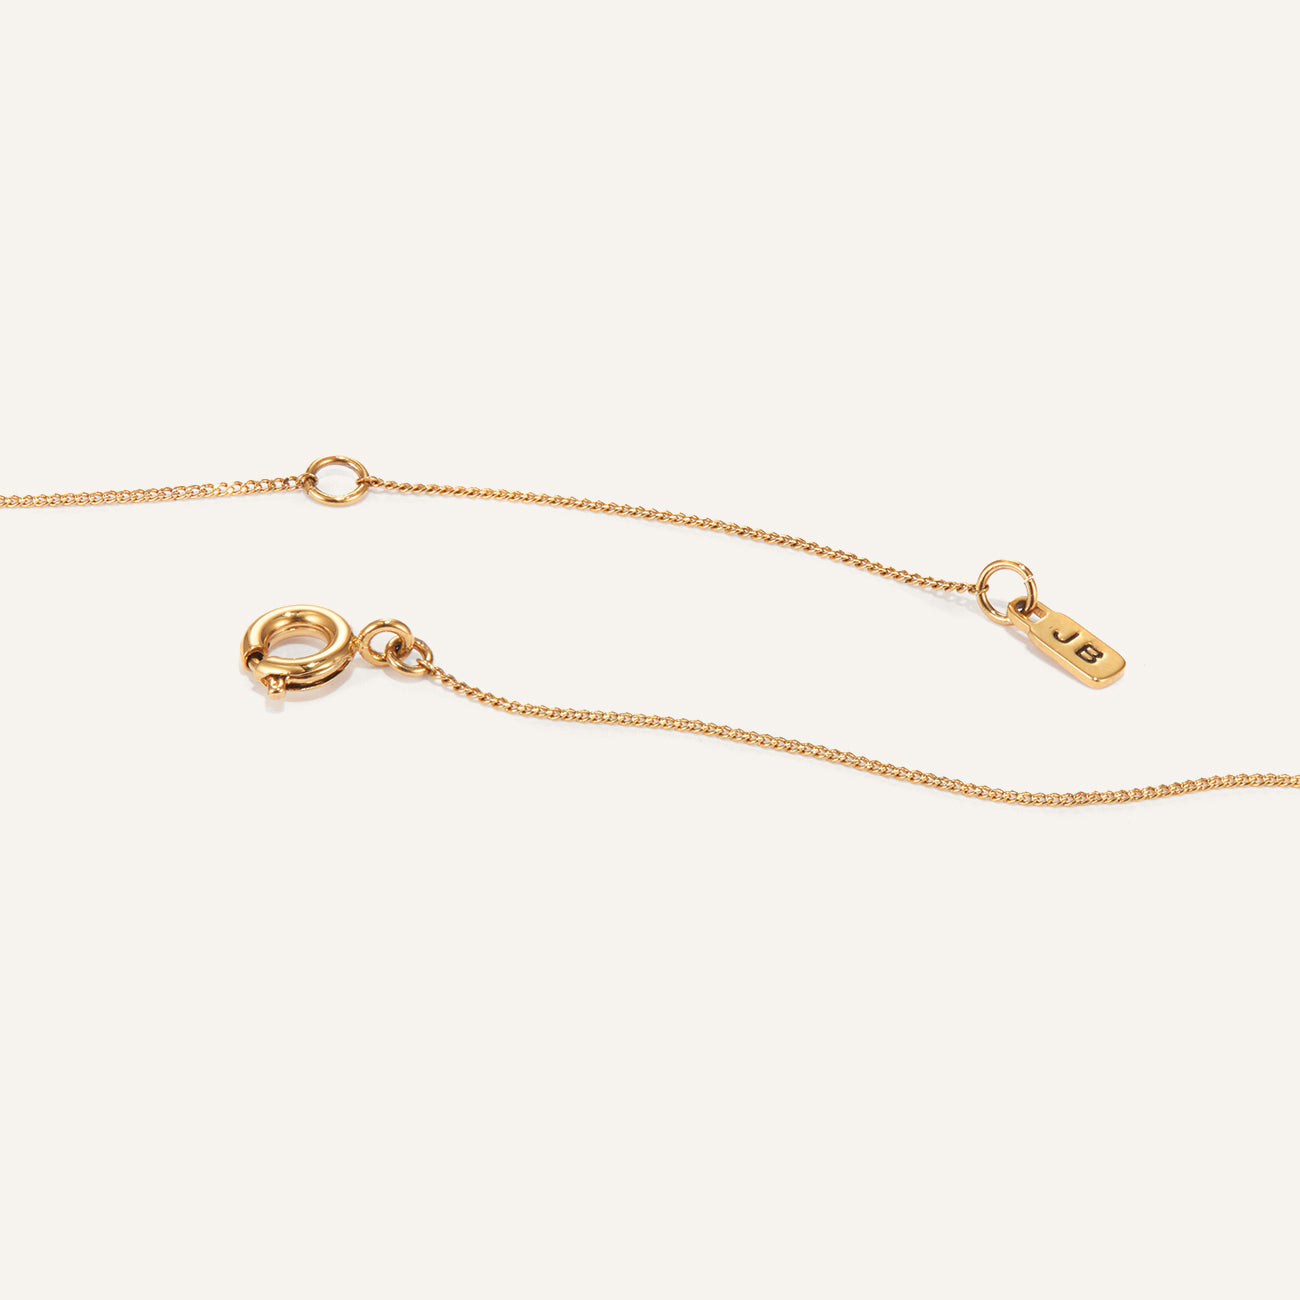 14k Gold Plated Monogram Necklace - M